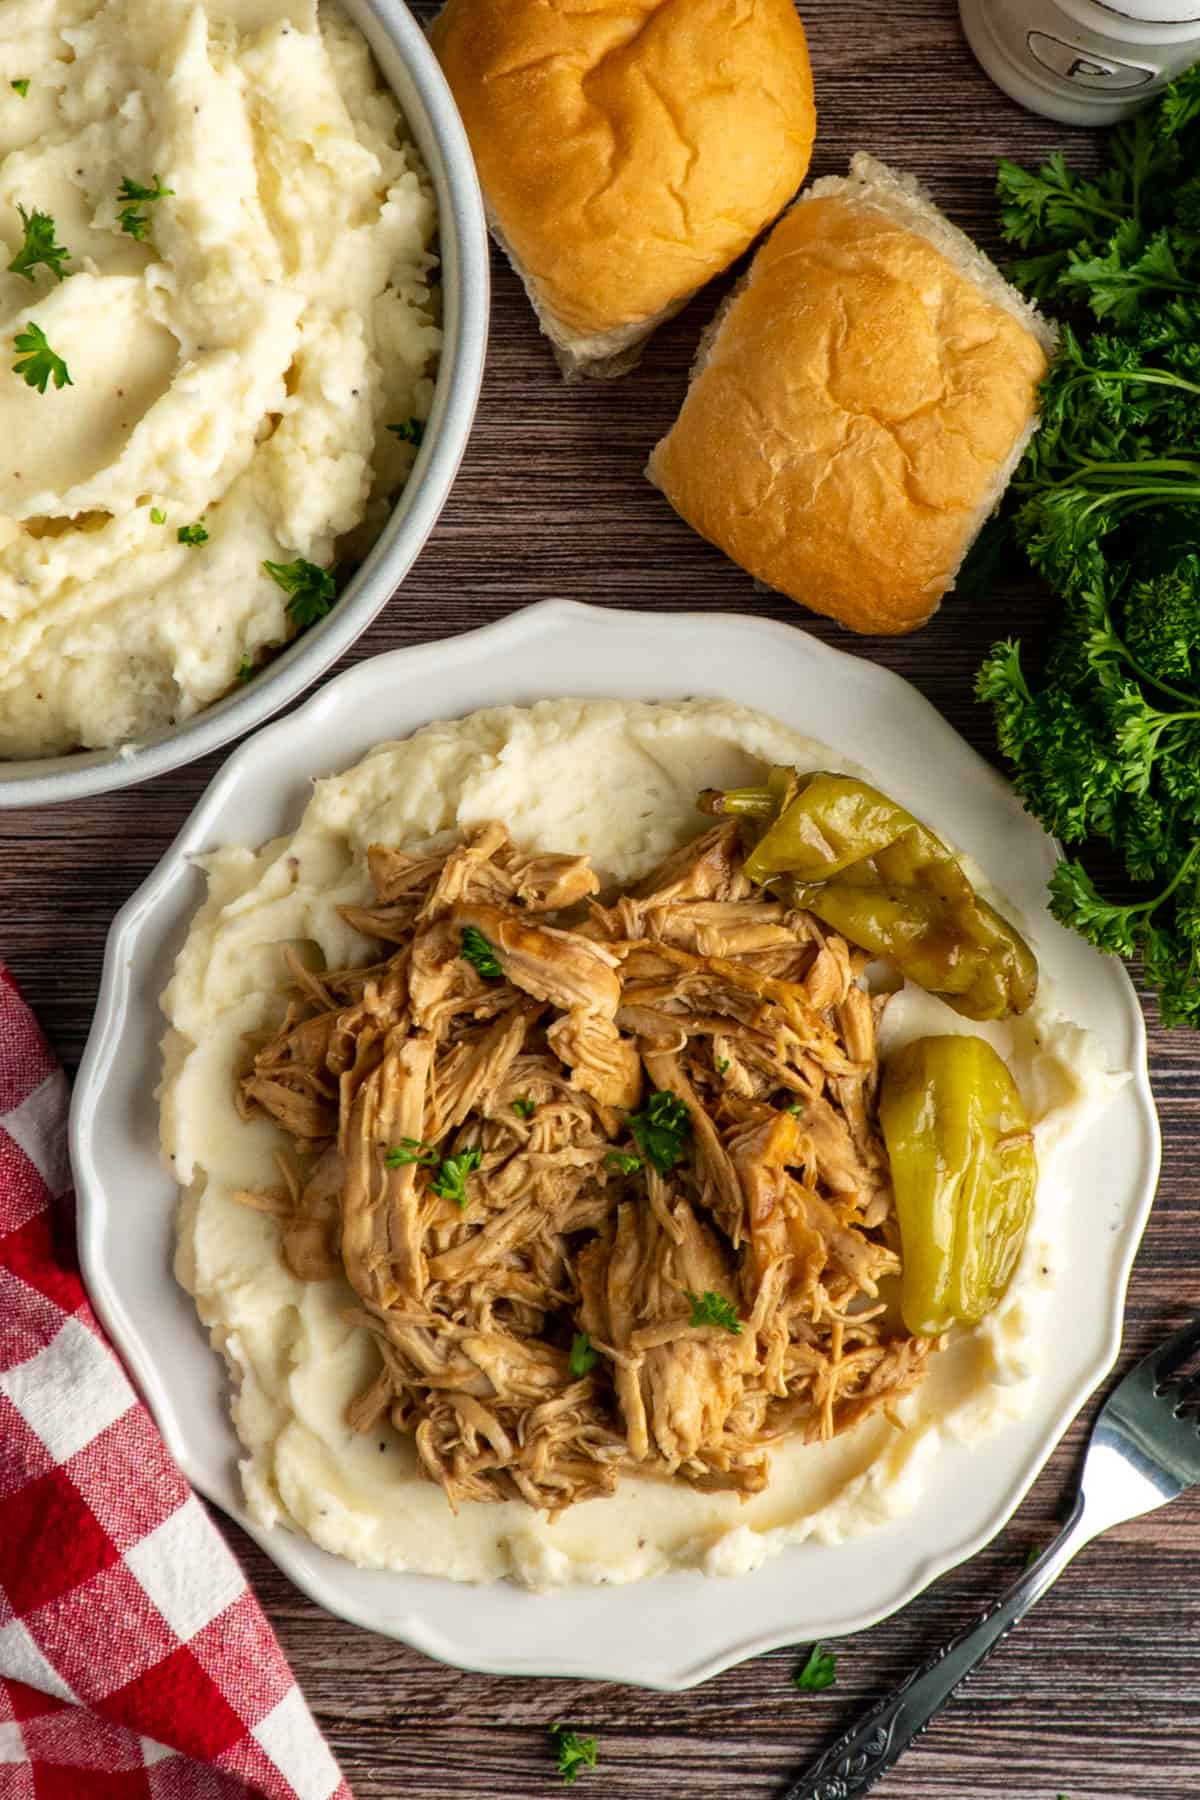 Shredded chicken on a plate of mashed potatoes garnished with pepperoncini peppers.